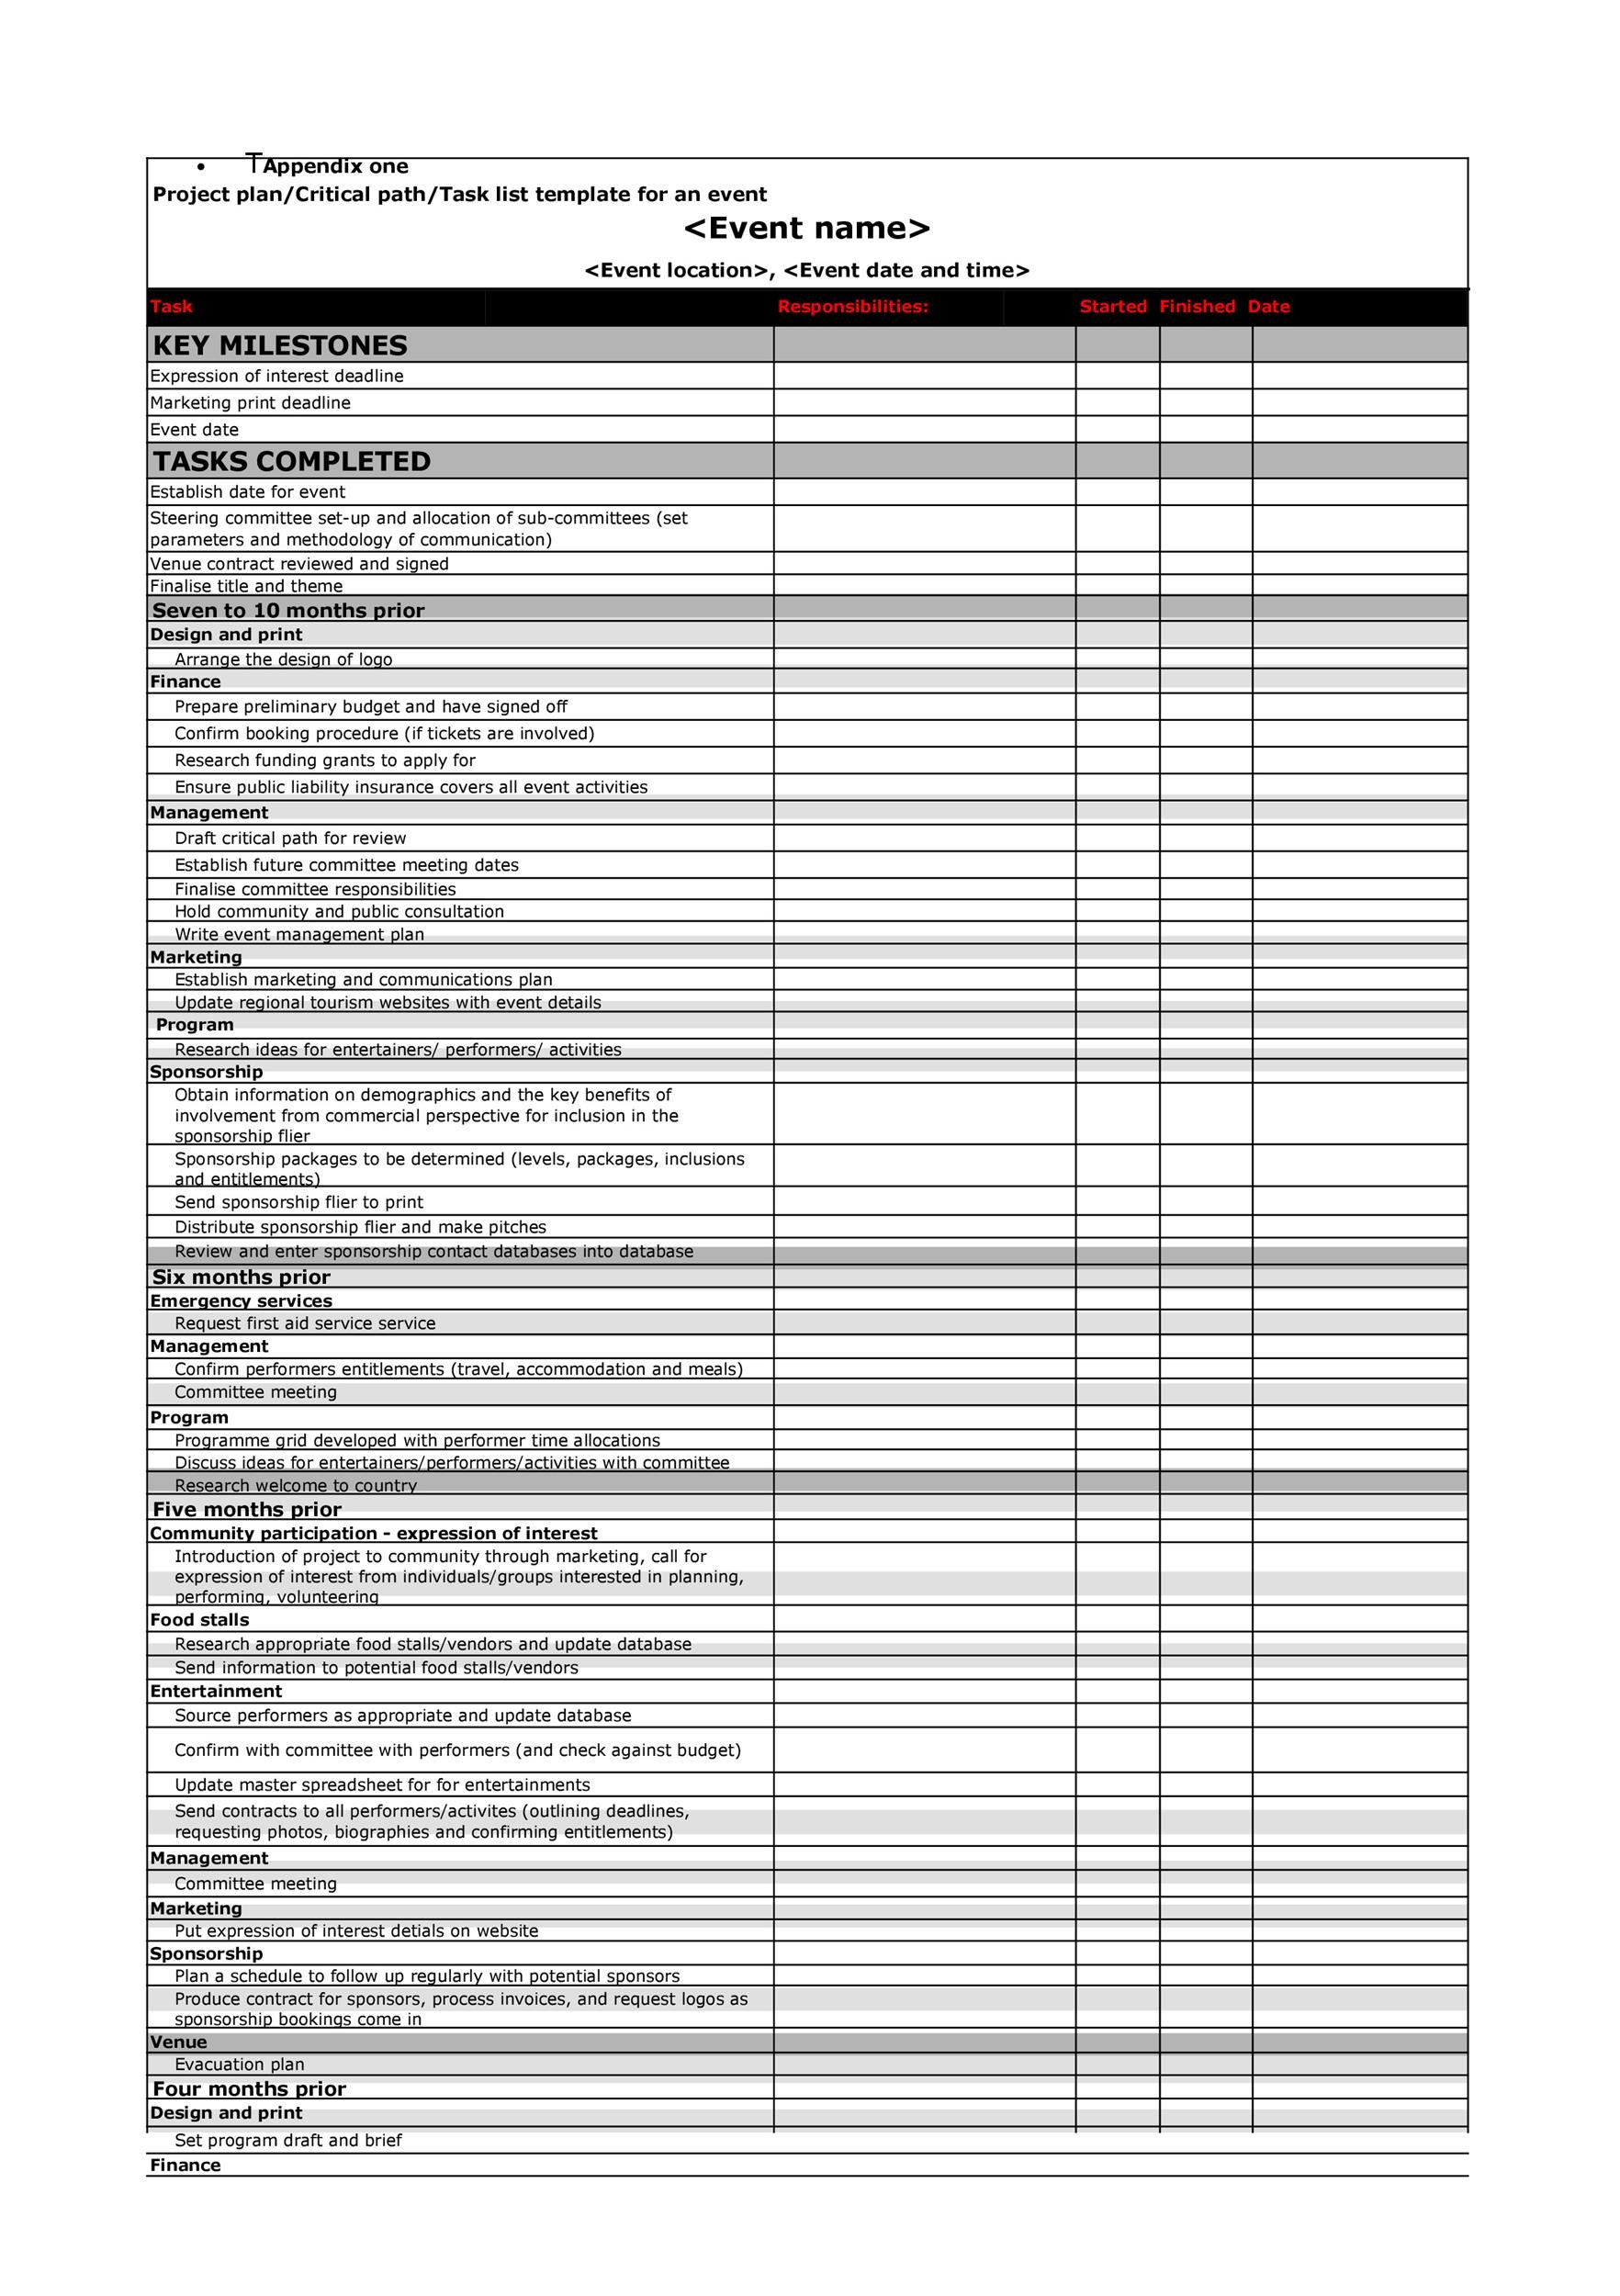 11 Professional Event Planning Checklist Templates ᐅ TemplateLab For Corporate Event Checklist Template For Corporate Event Checklist Template